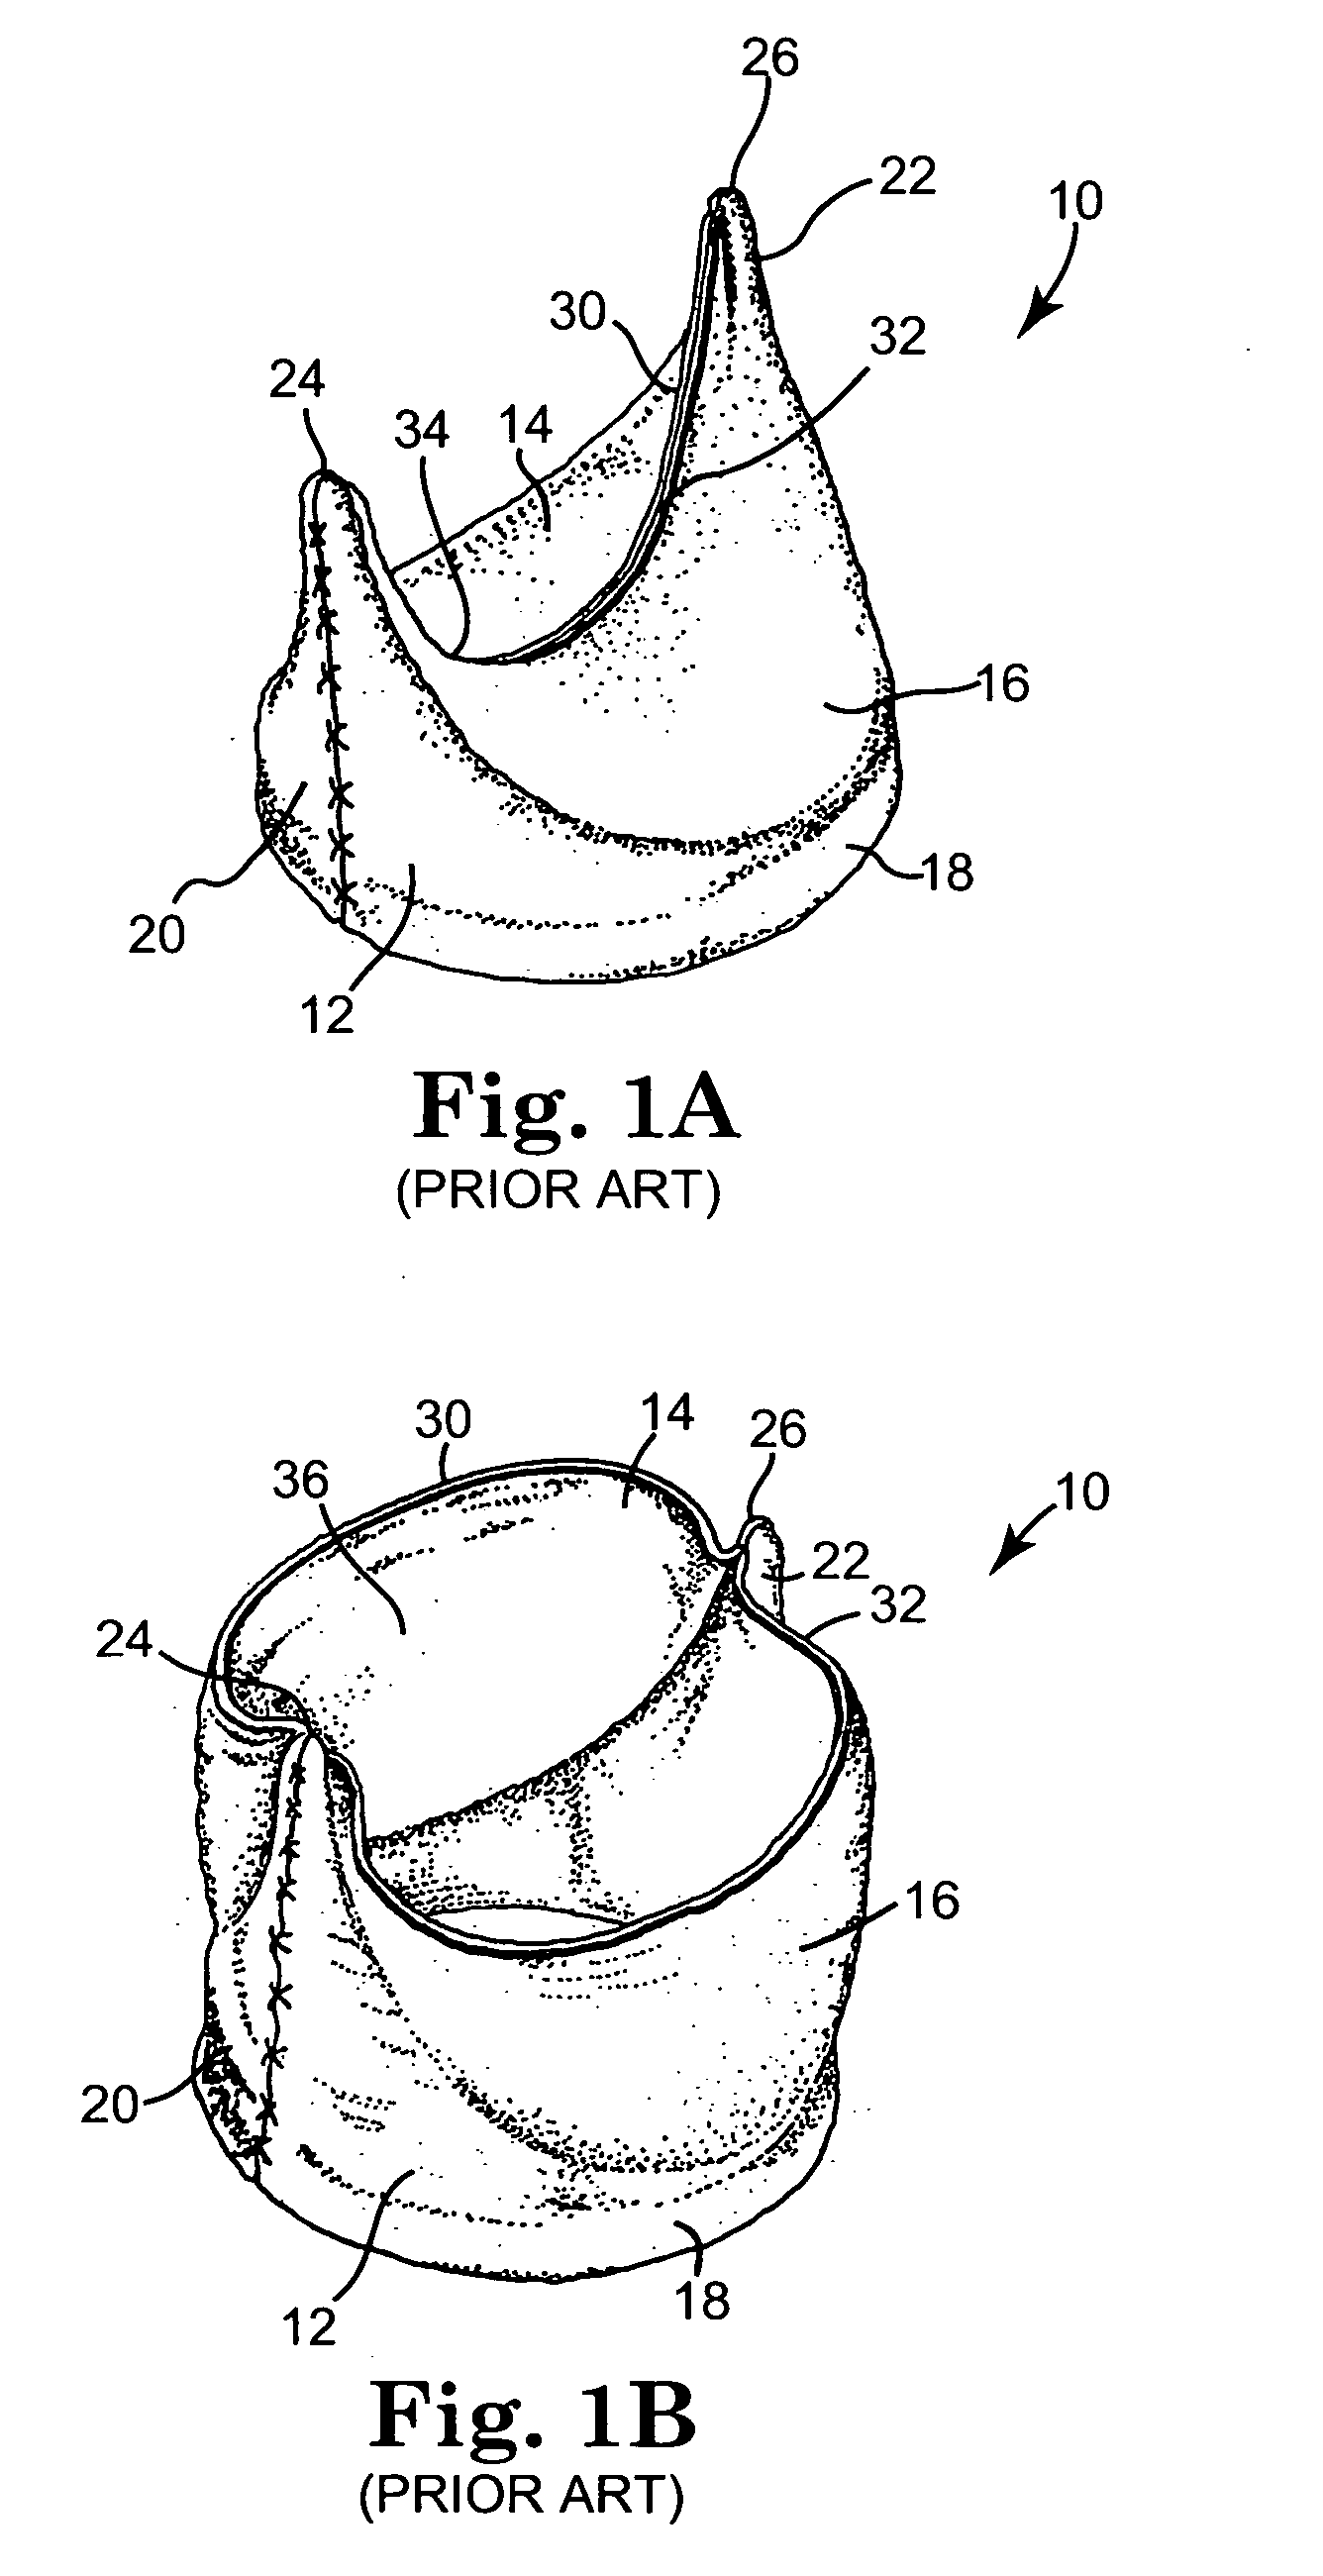 Bileaflet prosthetic valve and method of manufacture